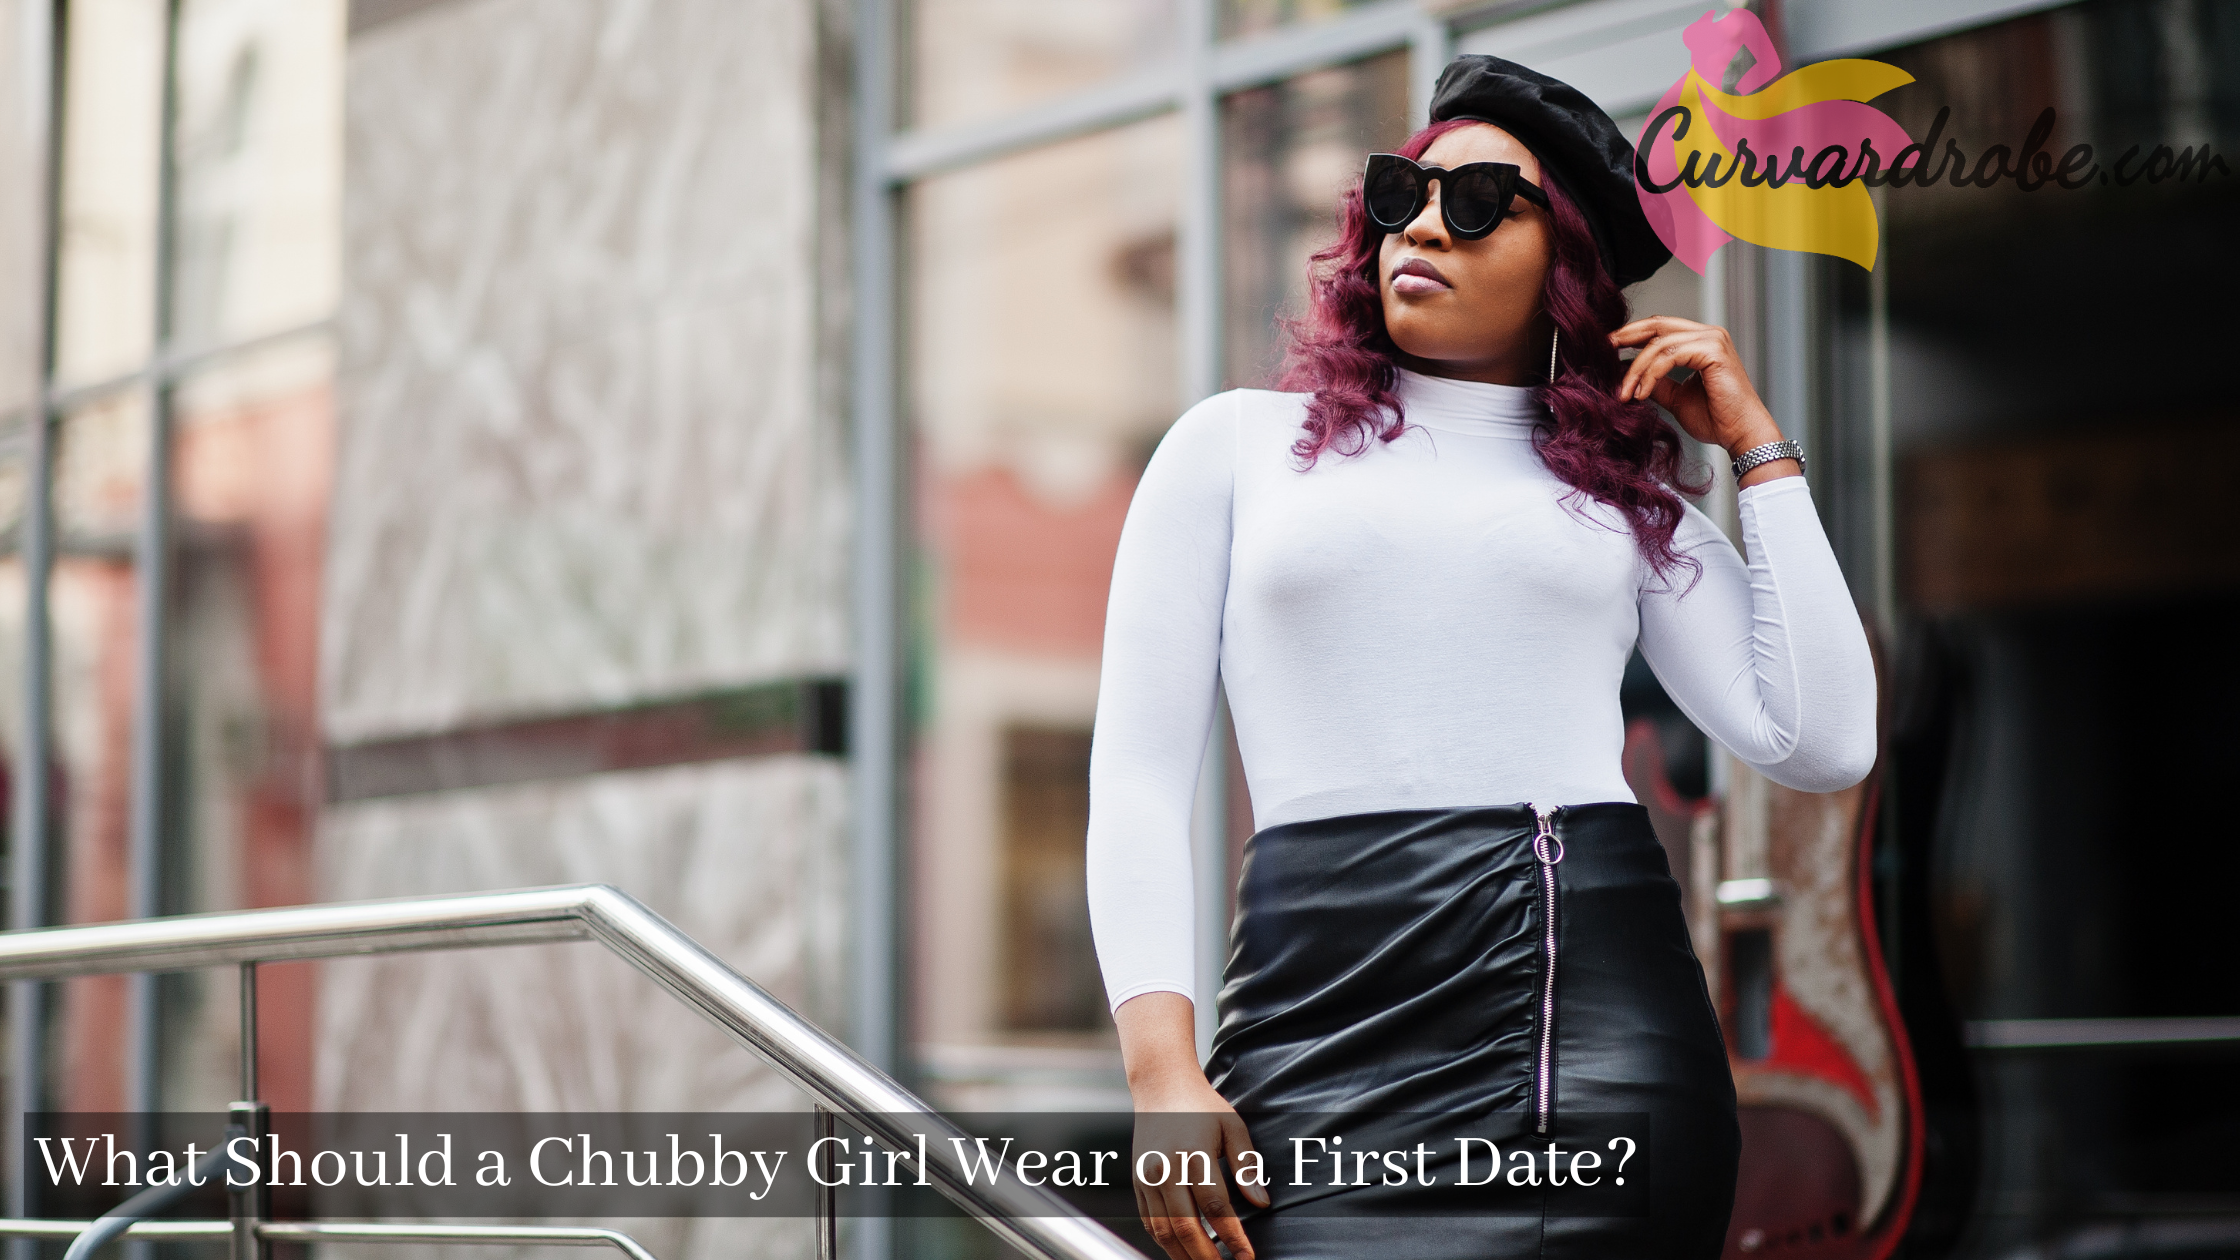 What should a chubby girl wear on a first date